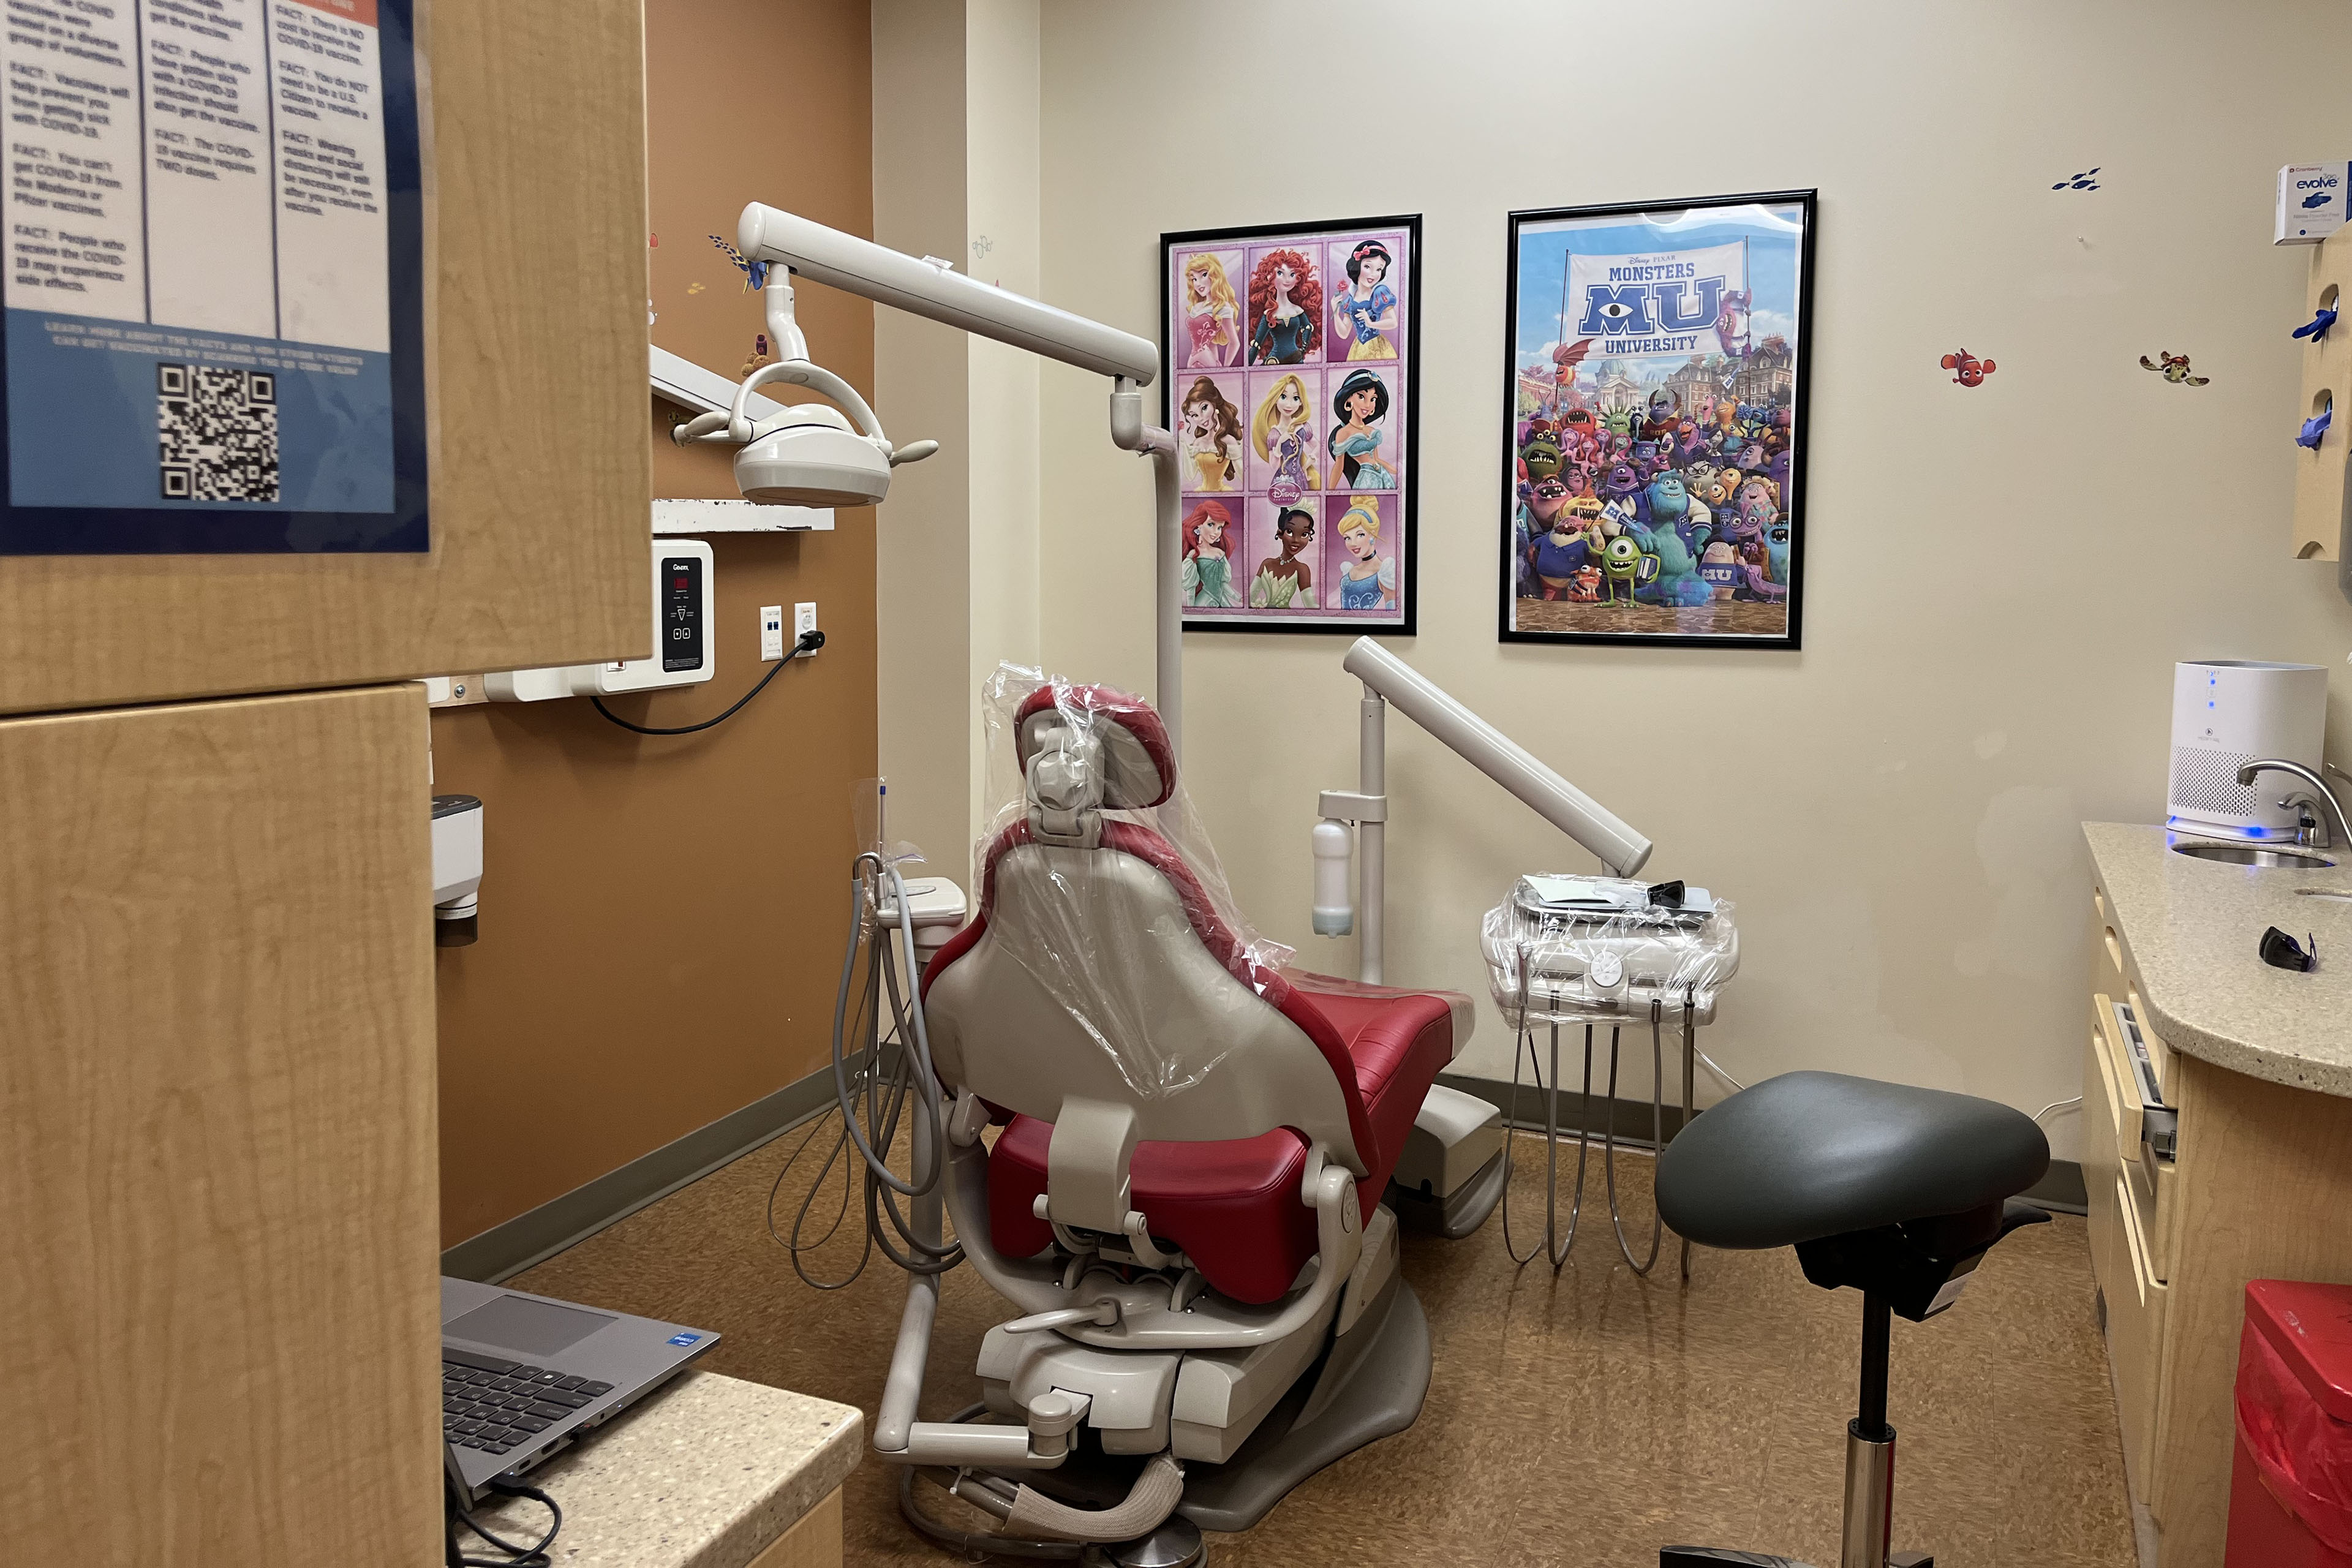 An empty dental exam room. It has a red chair and Disney movie posters on the wall.